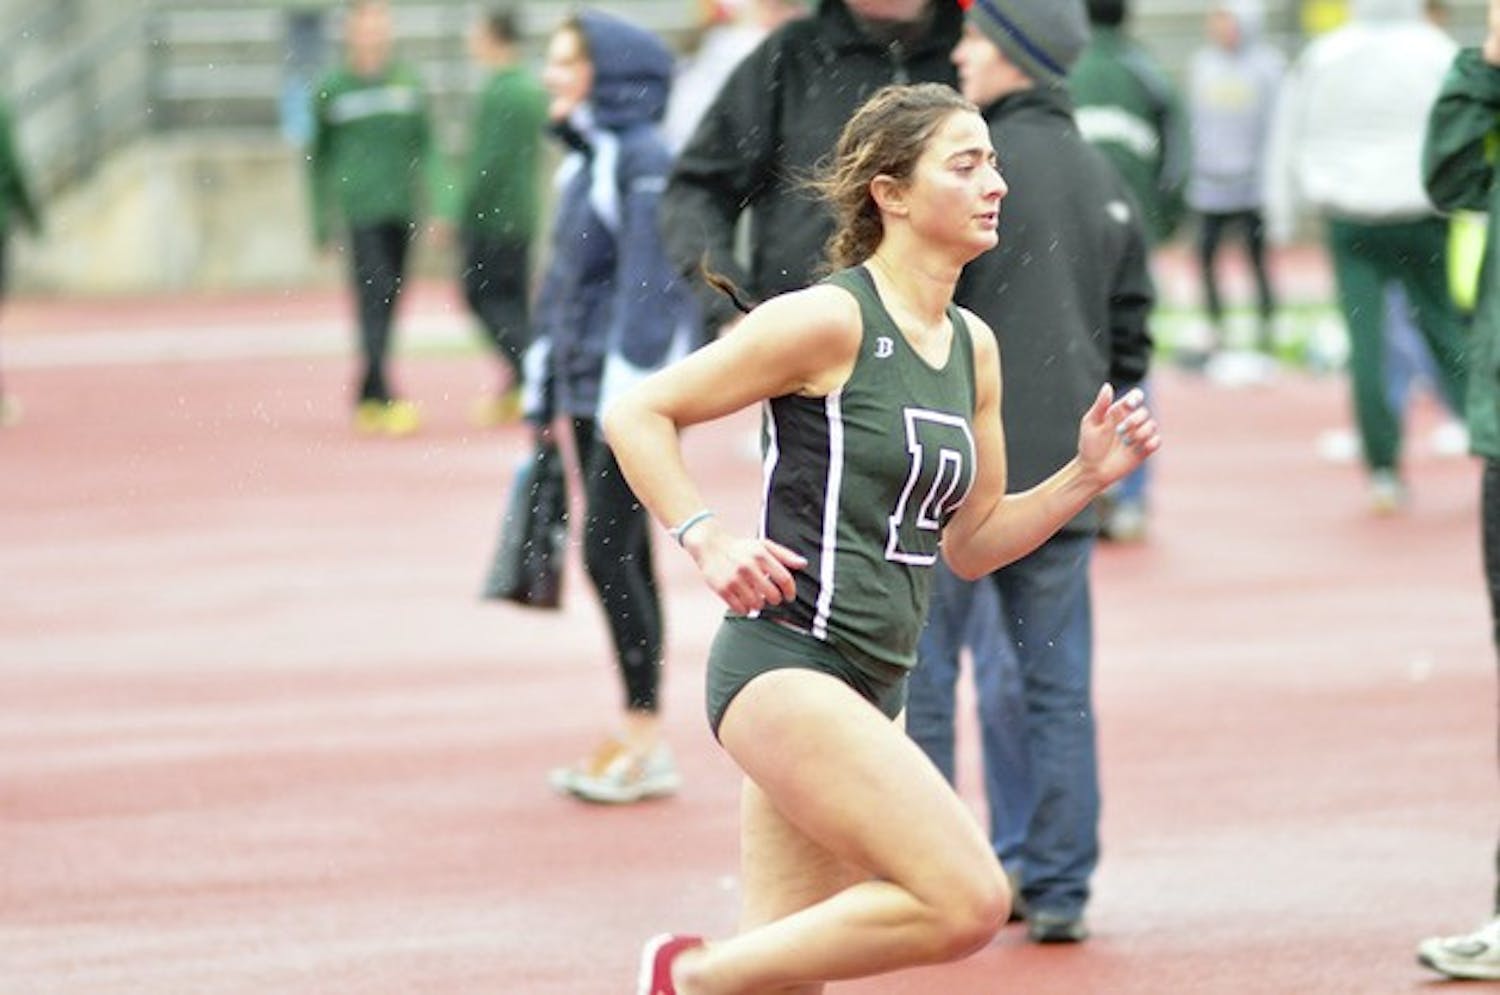 Alexi Pappas '12 excels both on and off the track, earning high grades and dominating in competition.